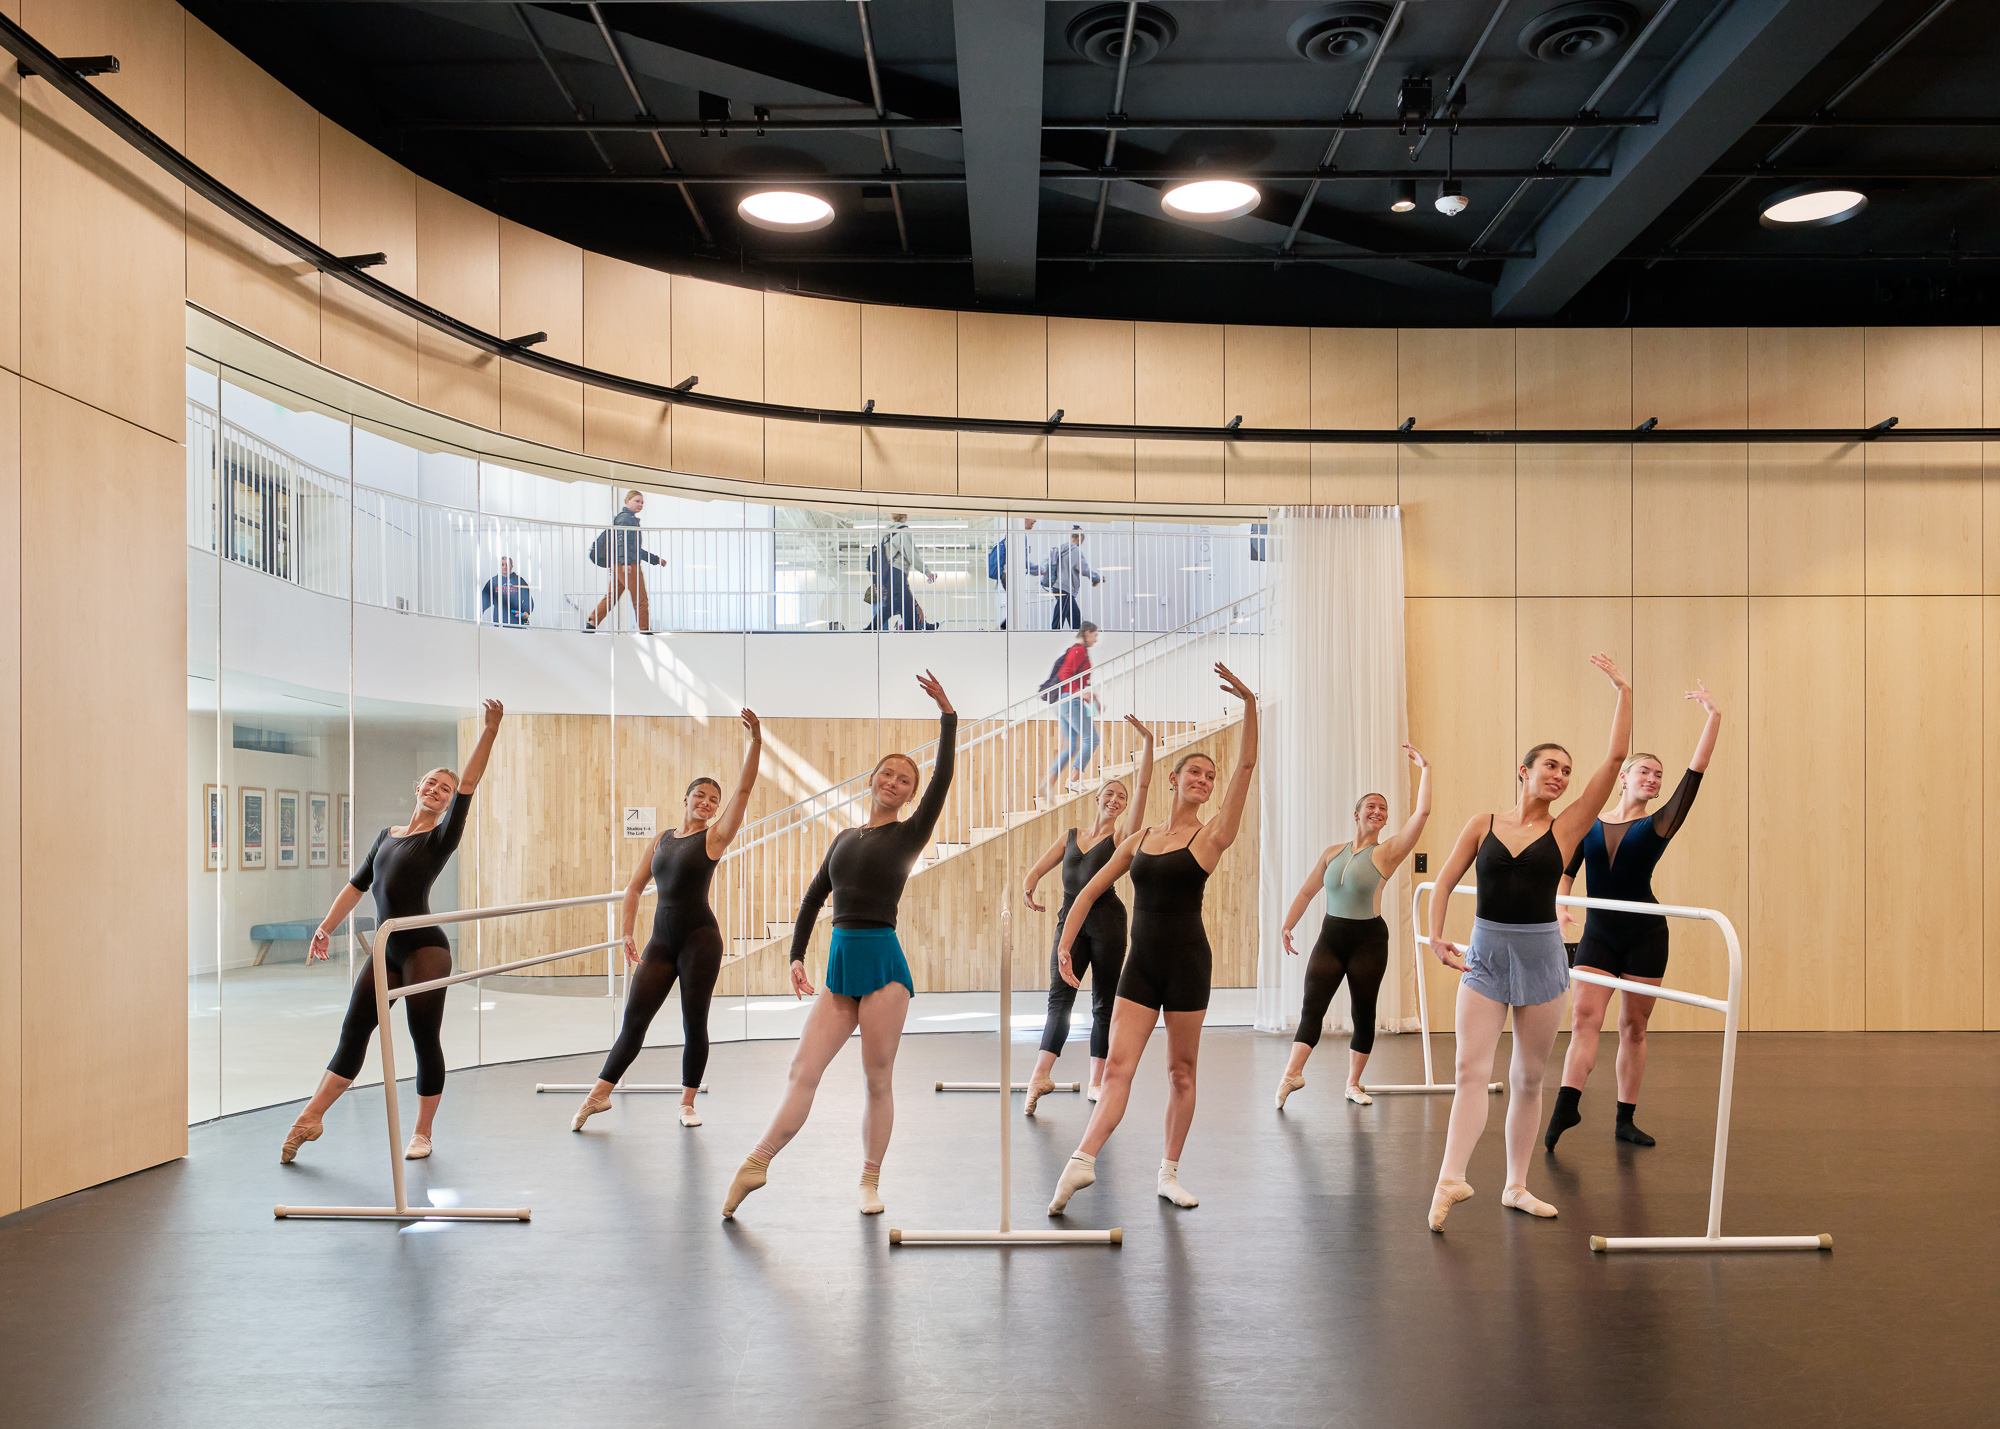 The main performance studio may be closed off from the lobby or opened to the lobby to create an interconnectedness with the rest of the building. Sandi Simon Center for Dance at Chapman University, Orange, California. © Eric Staudenmaier